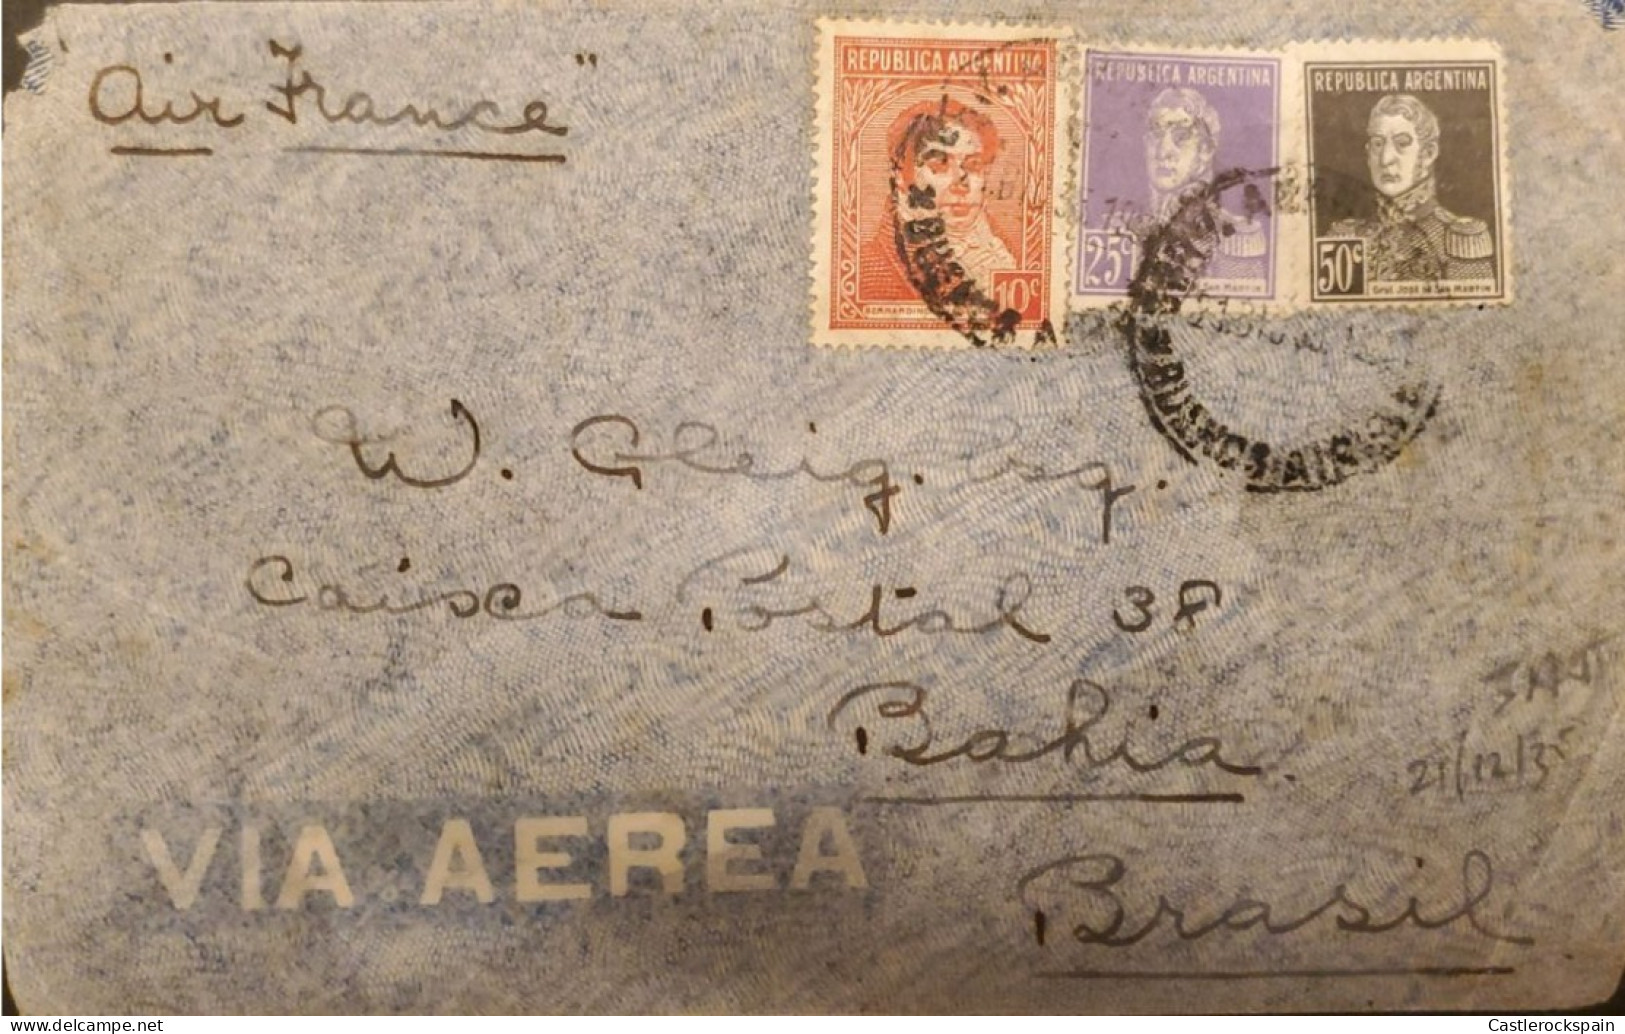 MI) 1935, ARGENTINA, AIR FRANCE, FROM BUENOS AIRES TO BAHIA - BRAZIL, AIR MAIL, GRAL SAN MARTIN AND RIVADAVIA STAMPS - Usati